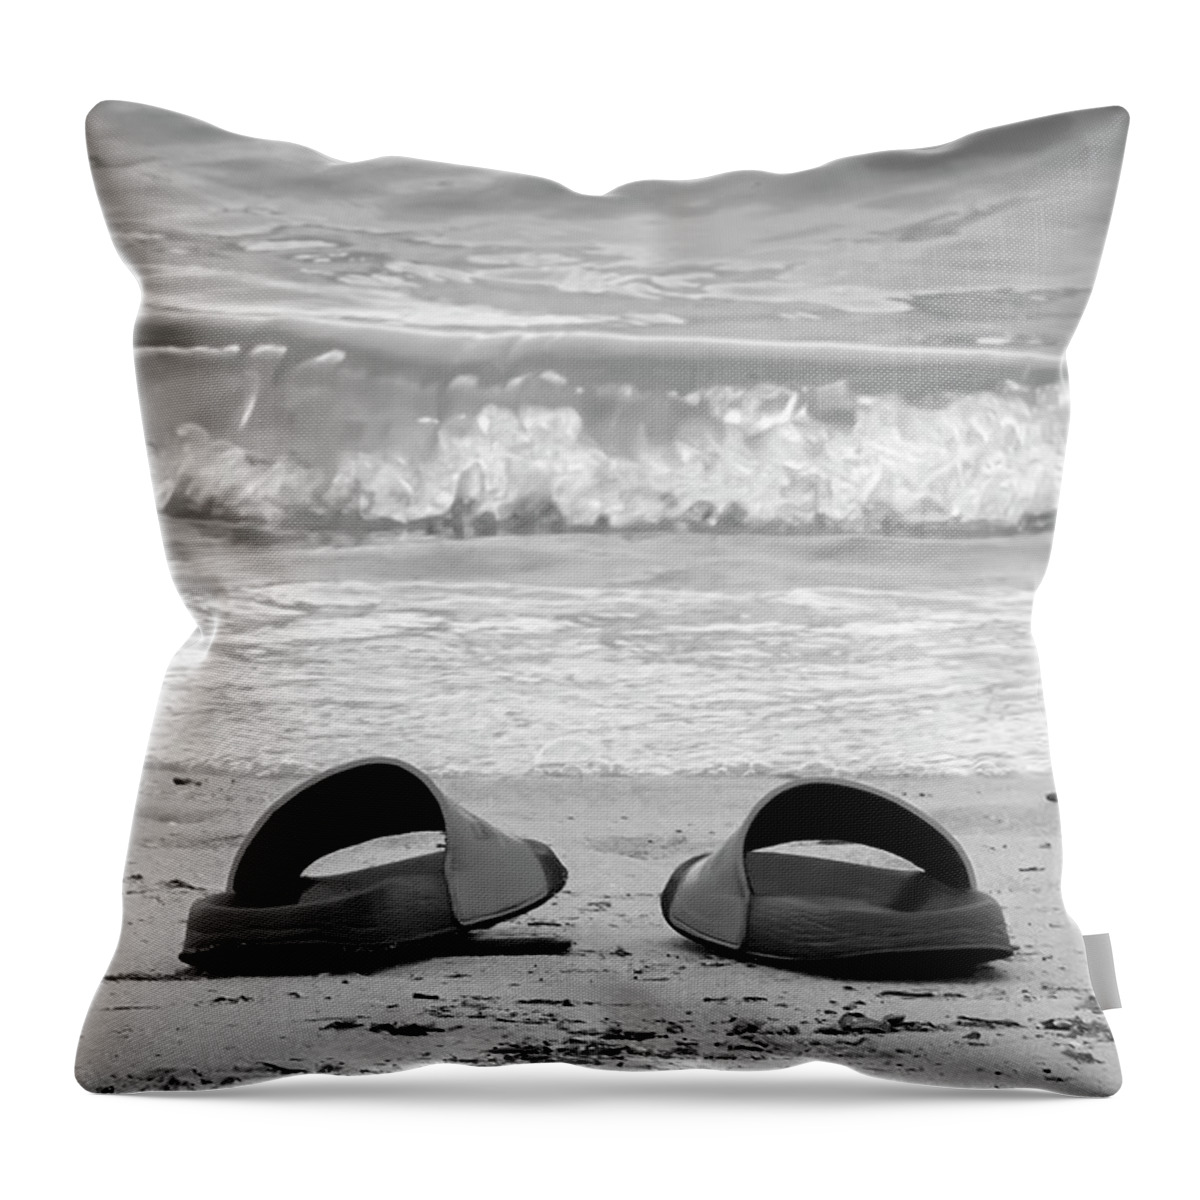 2d Throw Pillow featuring the photograph The Sand Between My Toes by Brian Wallace